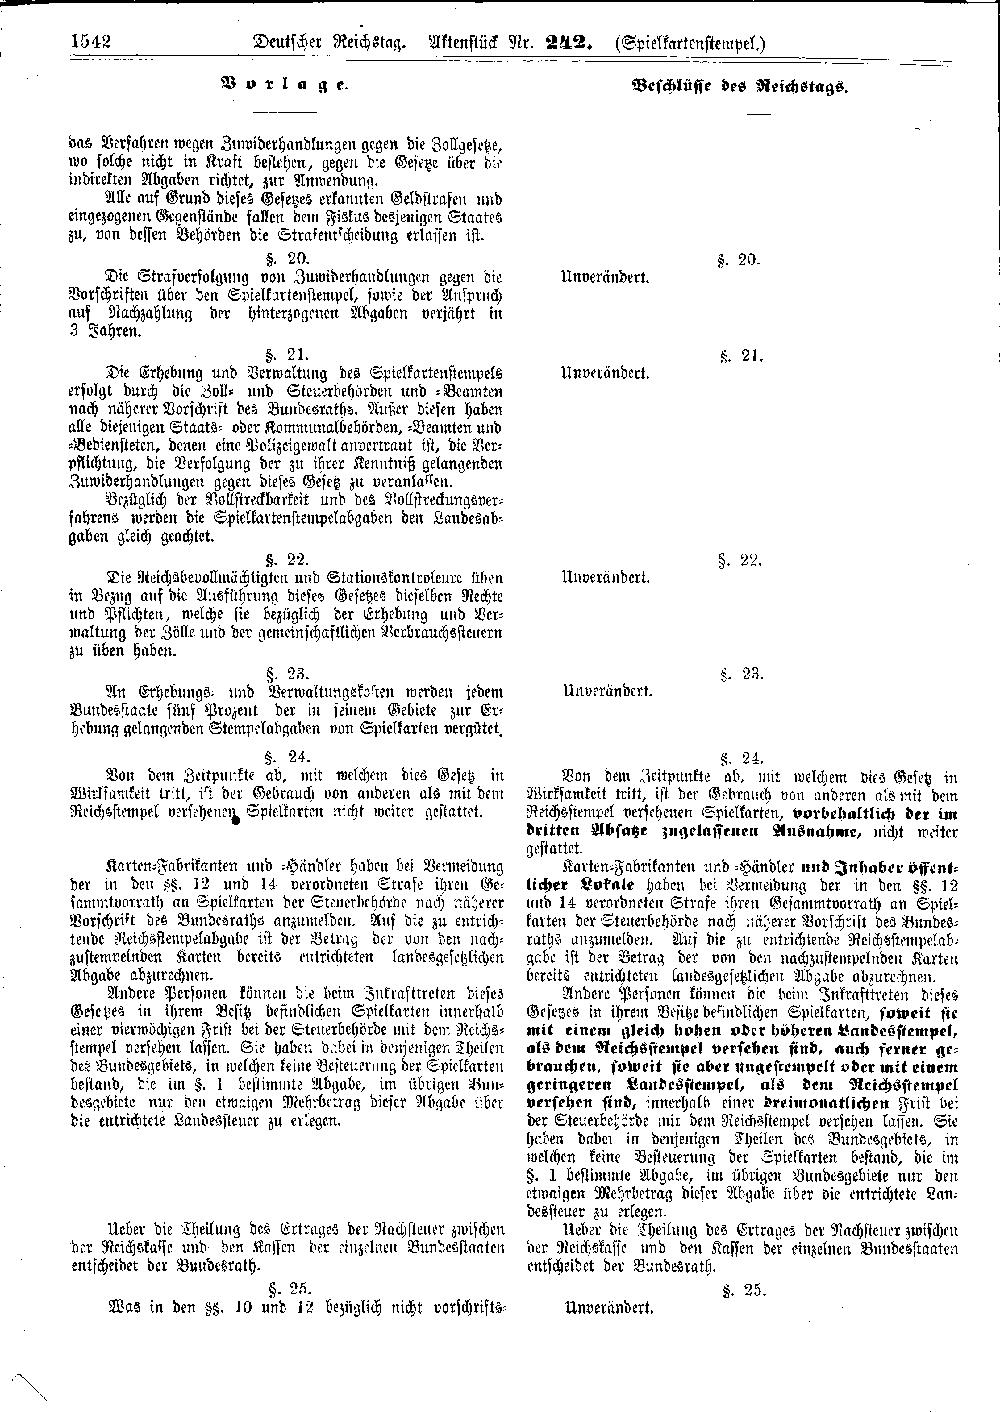 Scan of page 1542